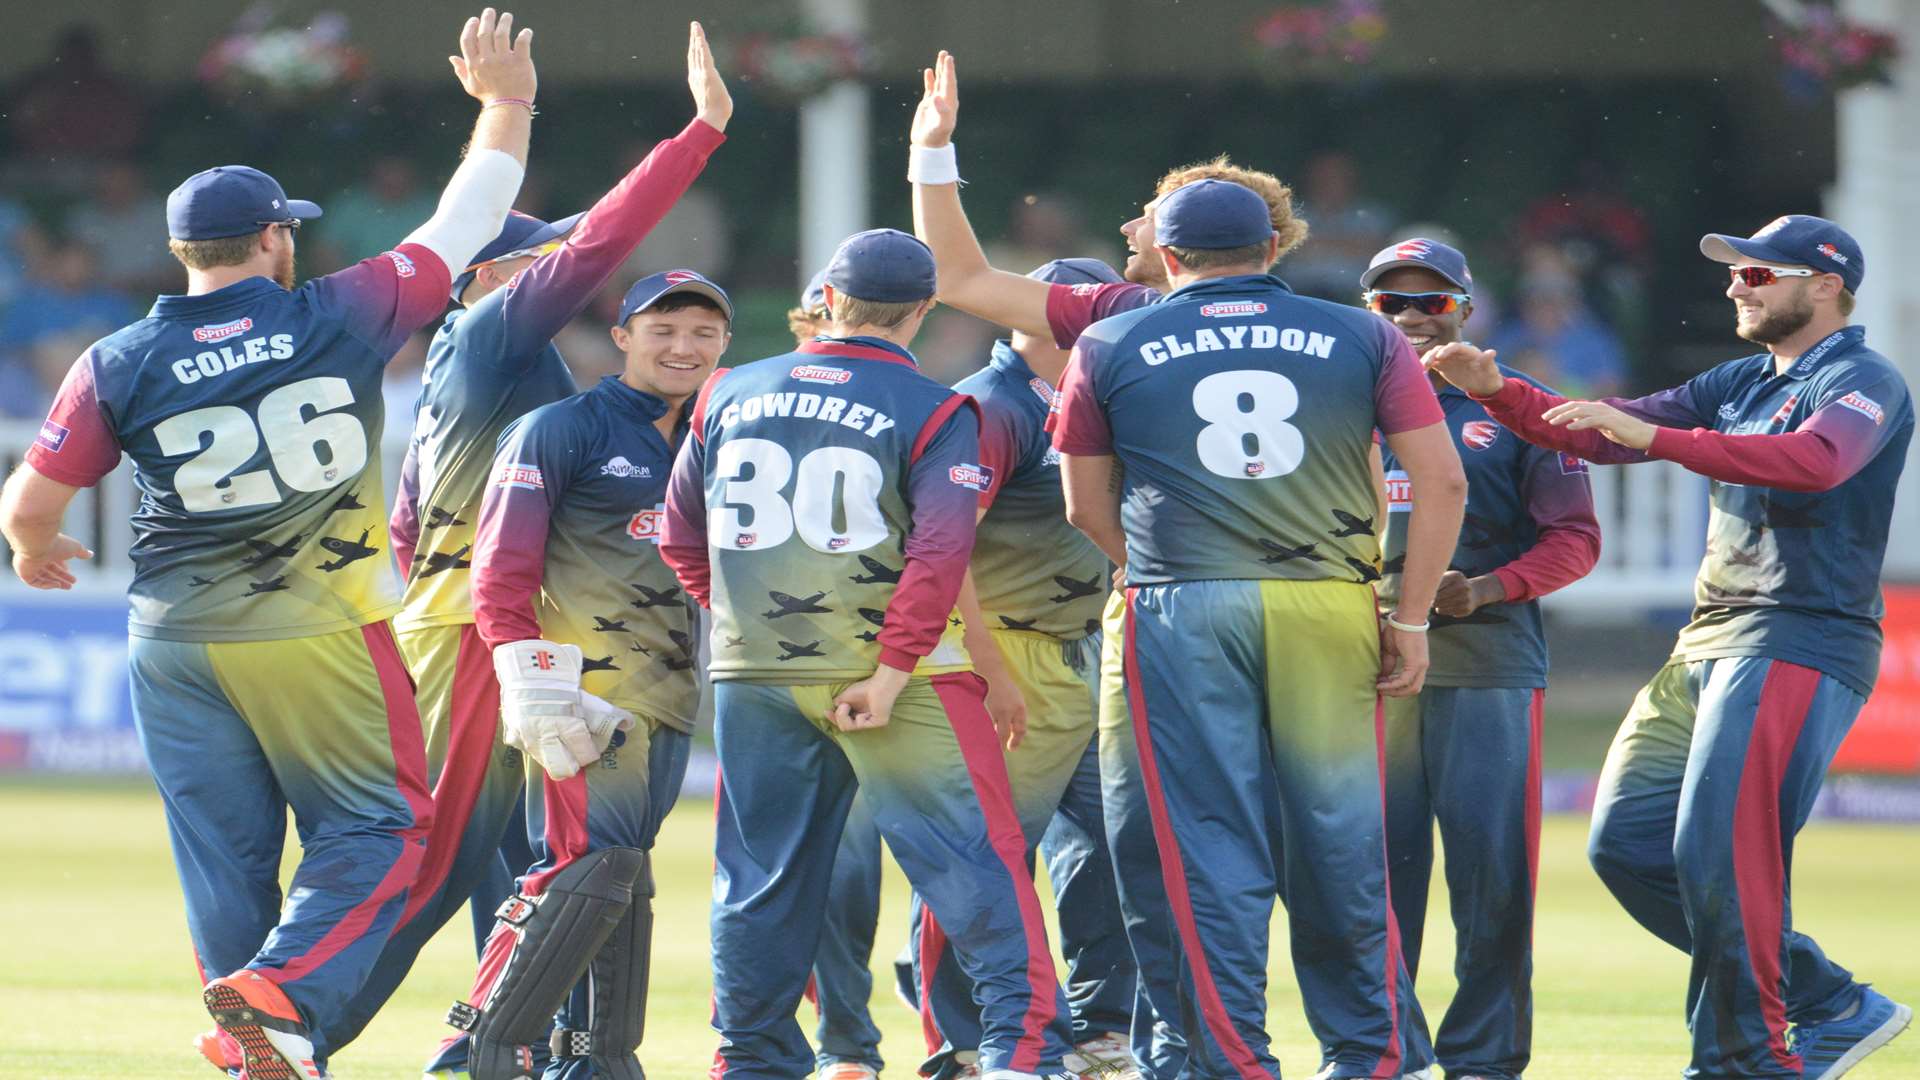 Kent celebrate a wicket against Essex in the NatWest T20 Blast Picture: Gary Browne